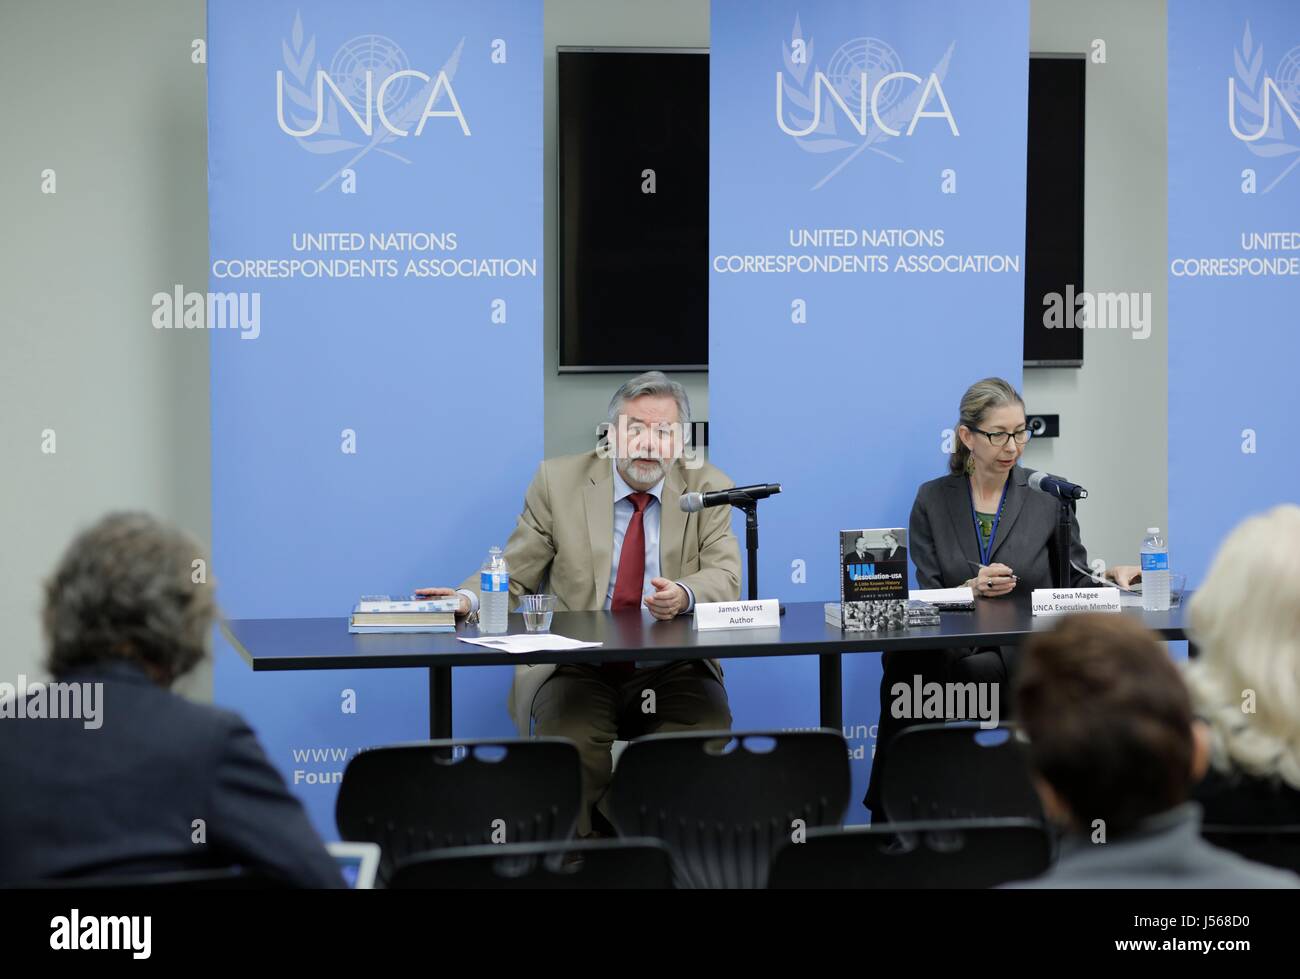 United Nations, New York, USA. 16th May, 2017. Book introduction by James Wurst "The UN Association-USA: A Little Known History of Advocacy and Action" today at the UN Headquarters in New York. Credit: dpa picture alliance/Alamy Live News Stock Photo